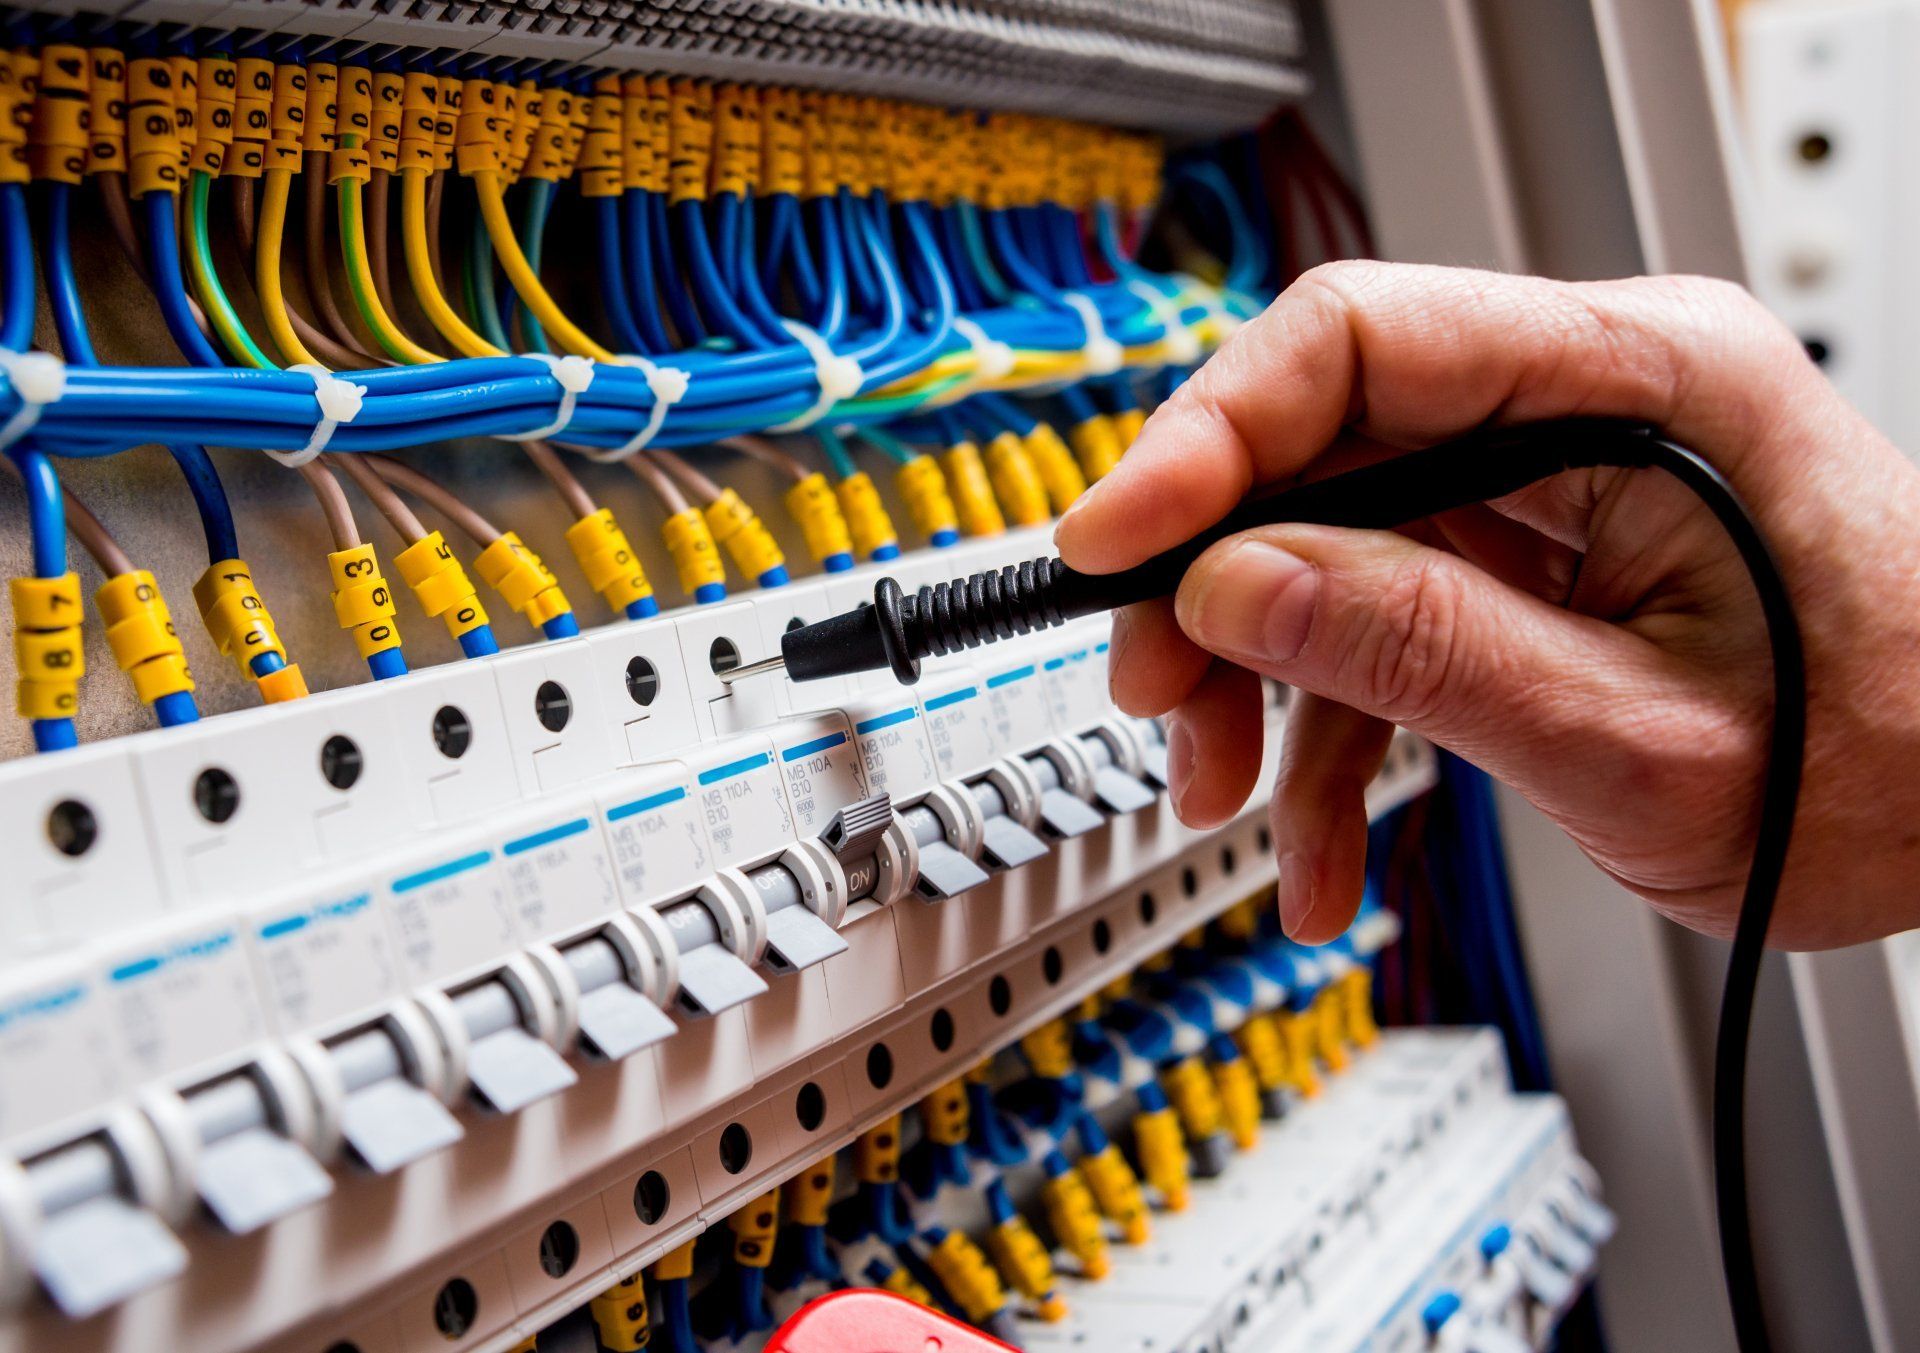 Electrical Measurements With Multimeter Tester - Air Conditioning Services in Mackay, QLD